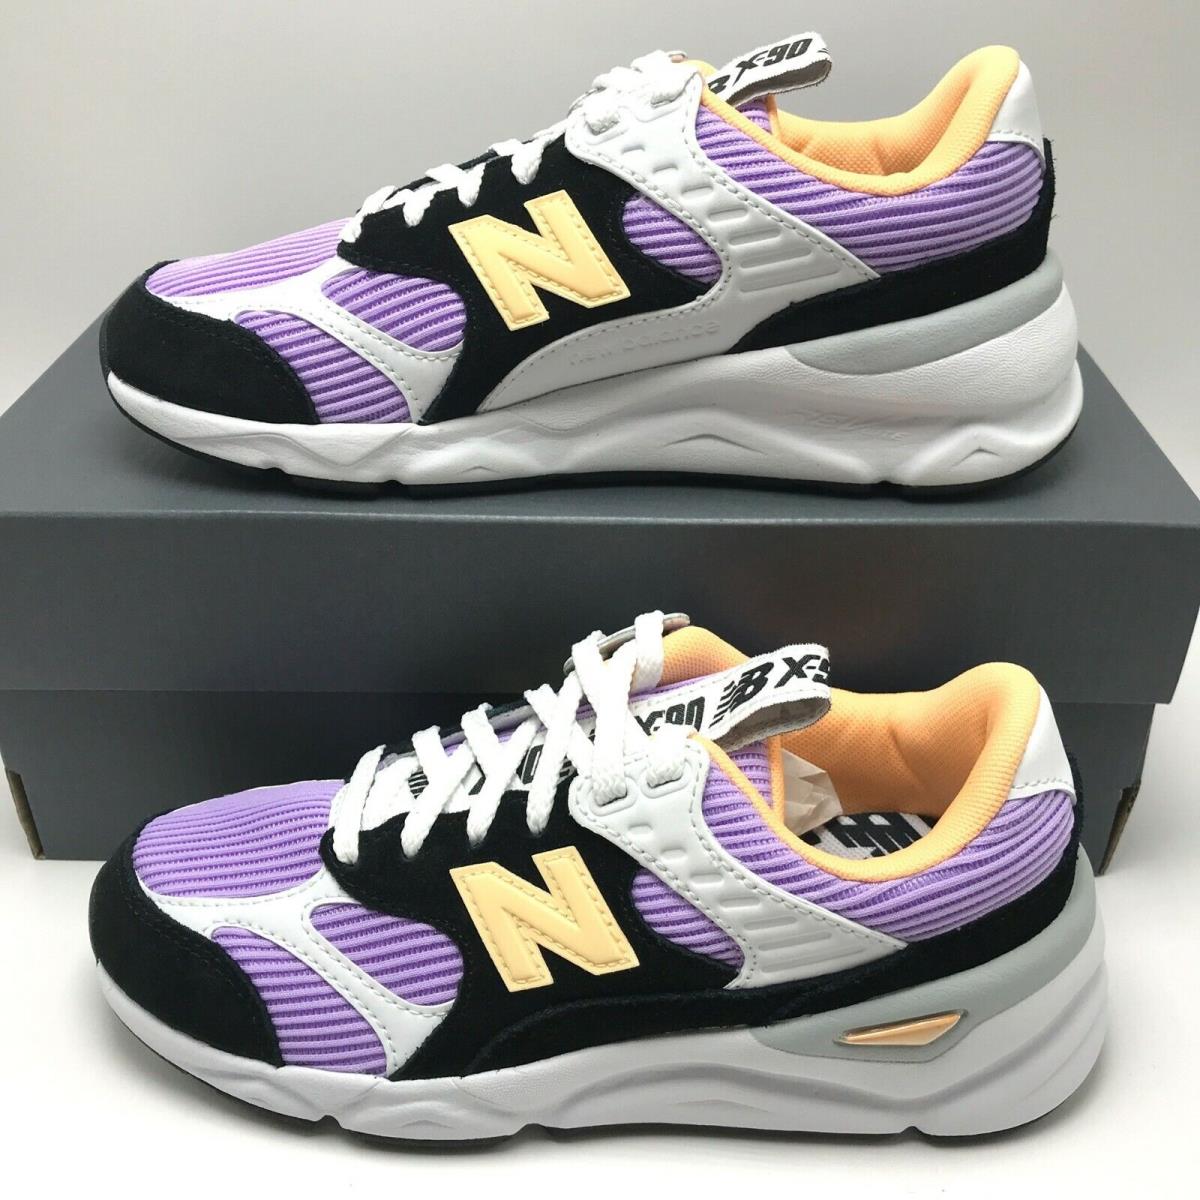 New Balance shoes  - Black with Dark Violet Glo 8